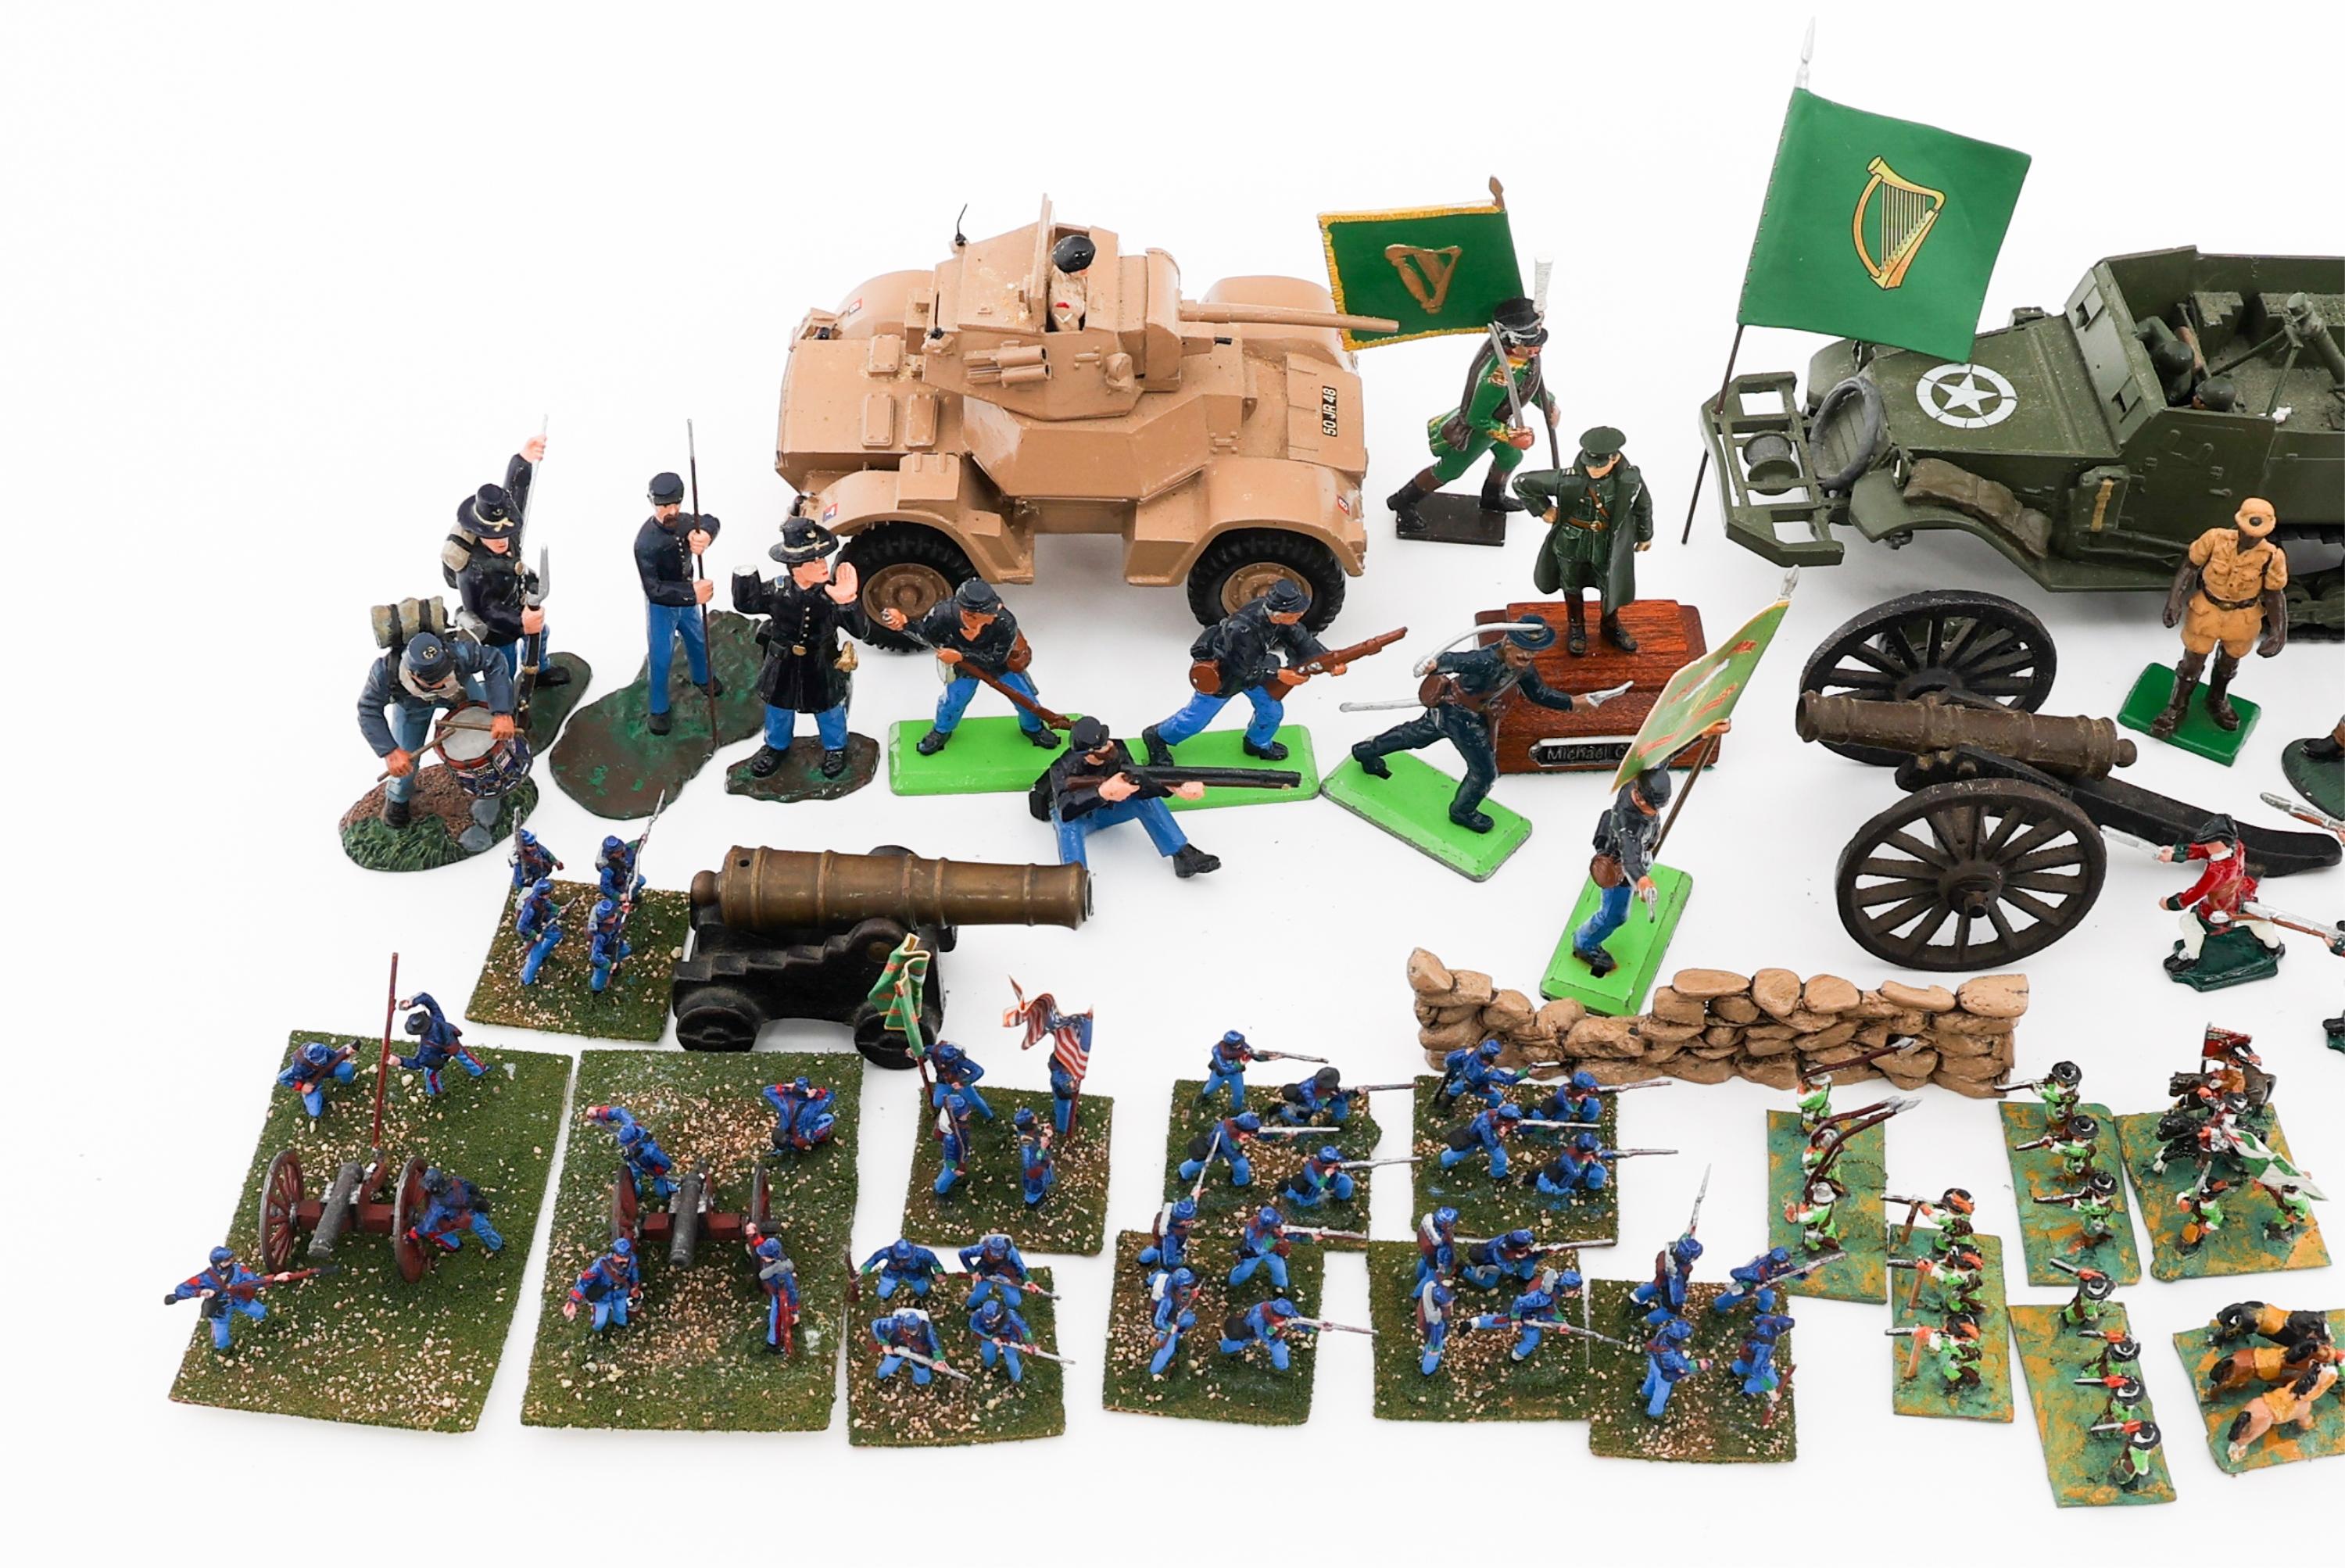 WORLD MILITARY THEMED TOYS & FIGURINES